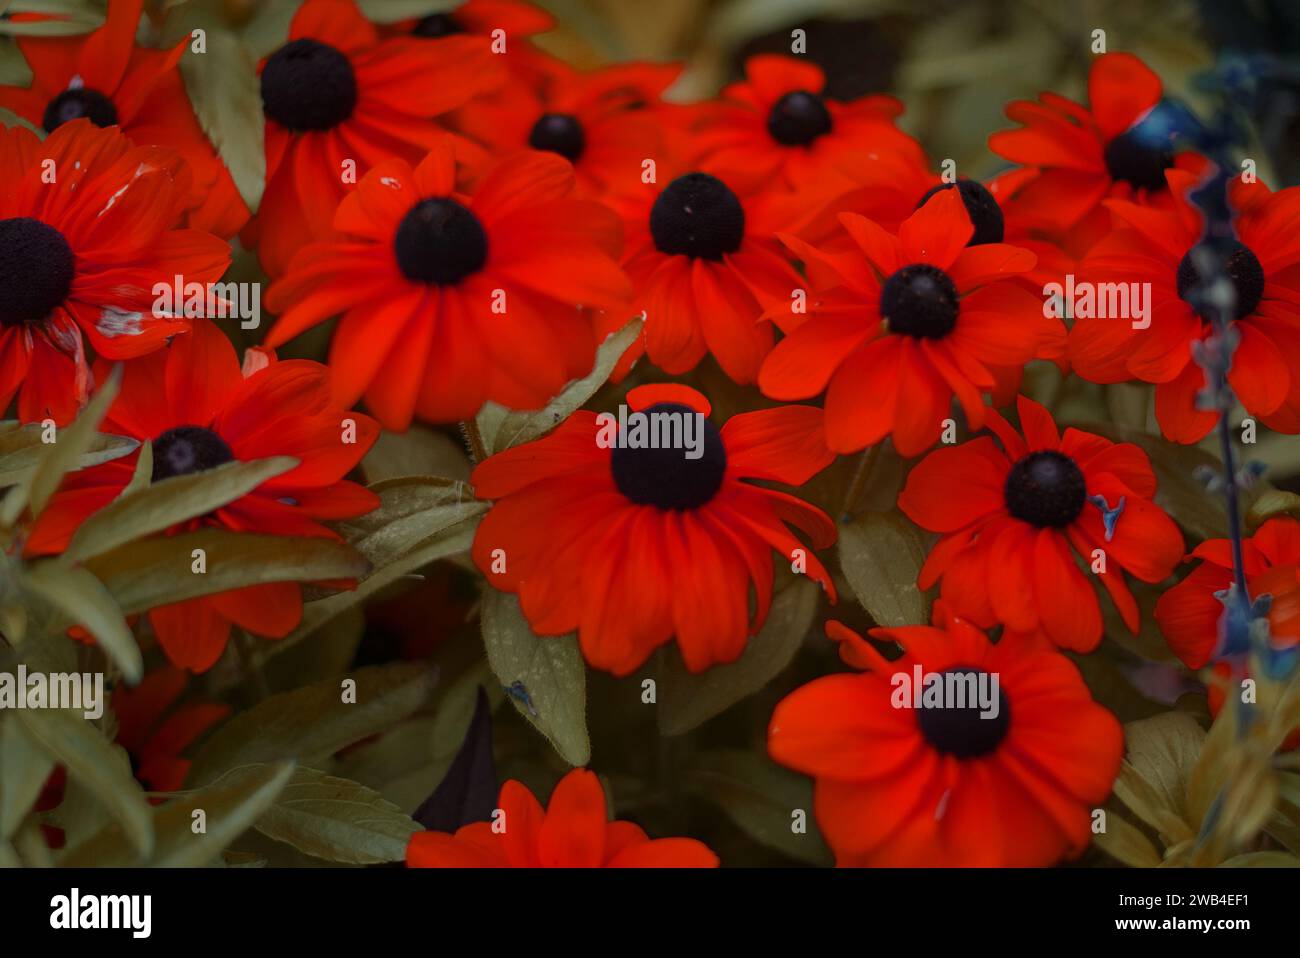 A beautiful selection of daisies of the species Rudbeckia hirta or black-eyed Susan in red. This flower is an ornamental plant. From the aster family. Stock Photo